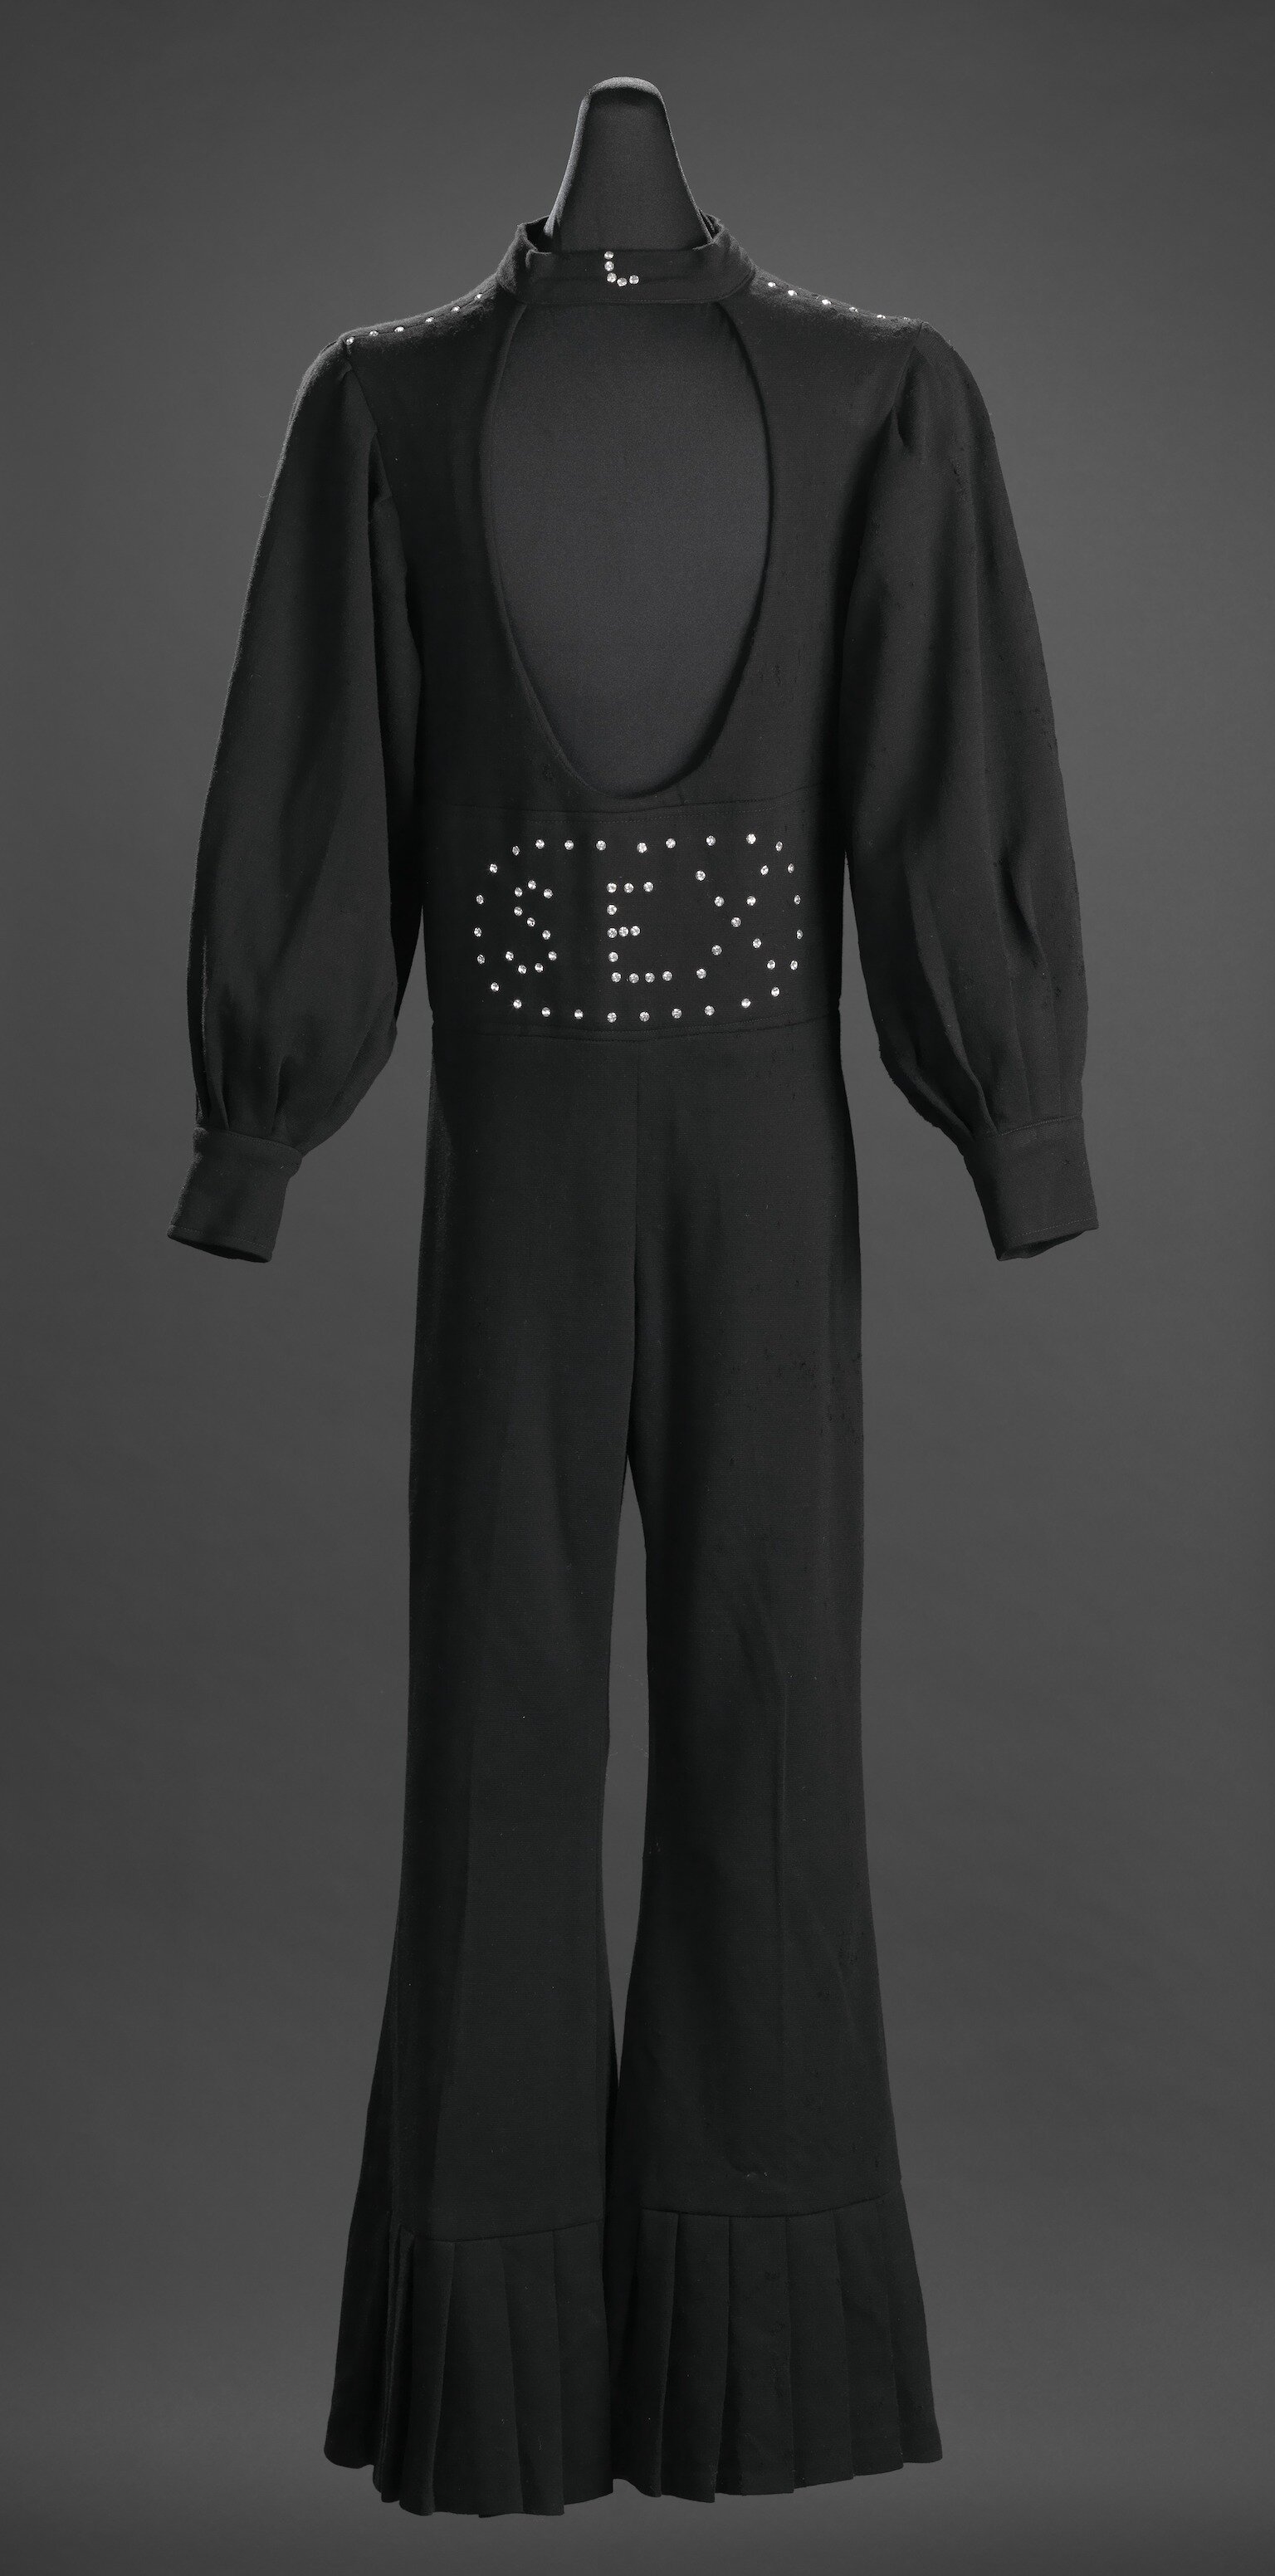 Black "Sex" jumpsuit owned by James Brown 1970-1989